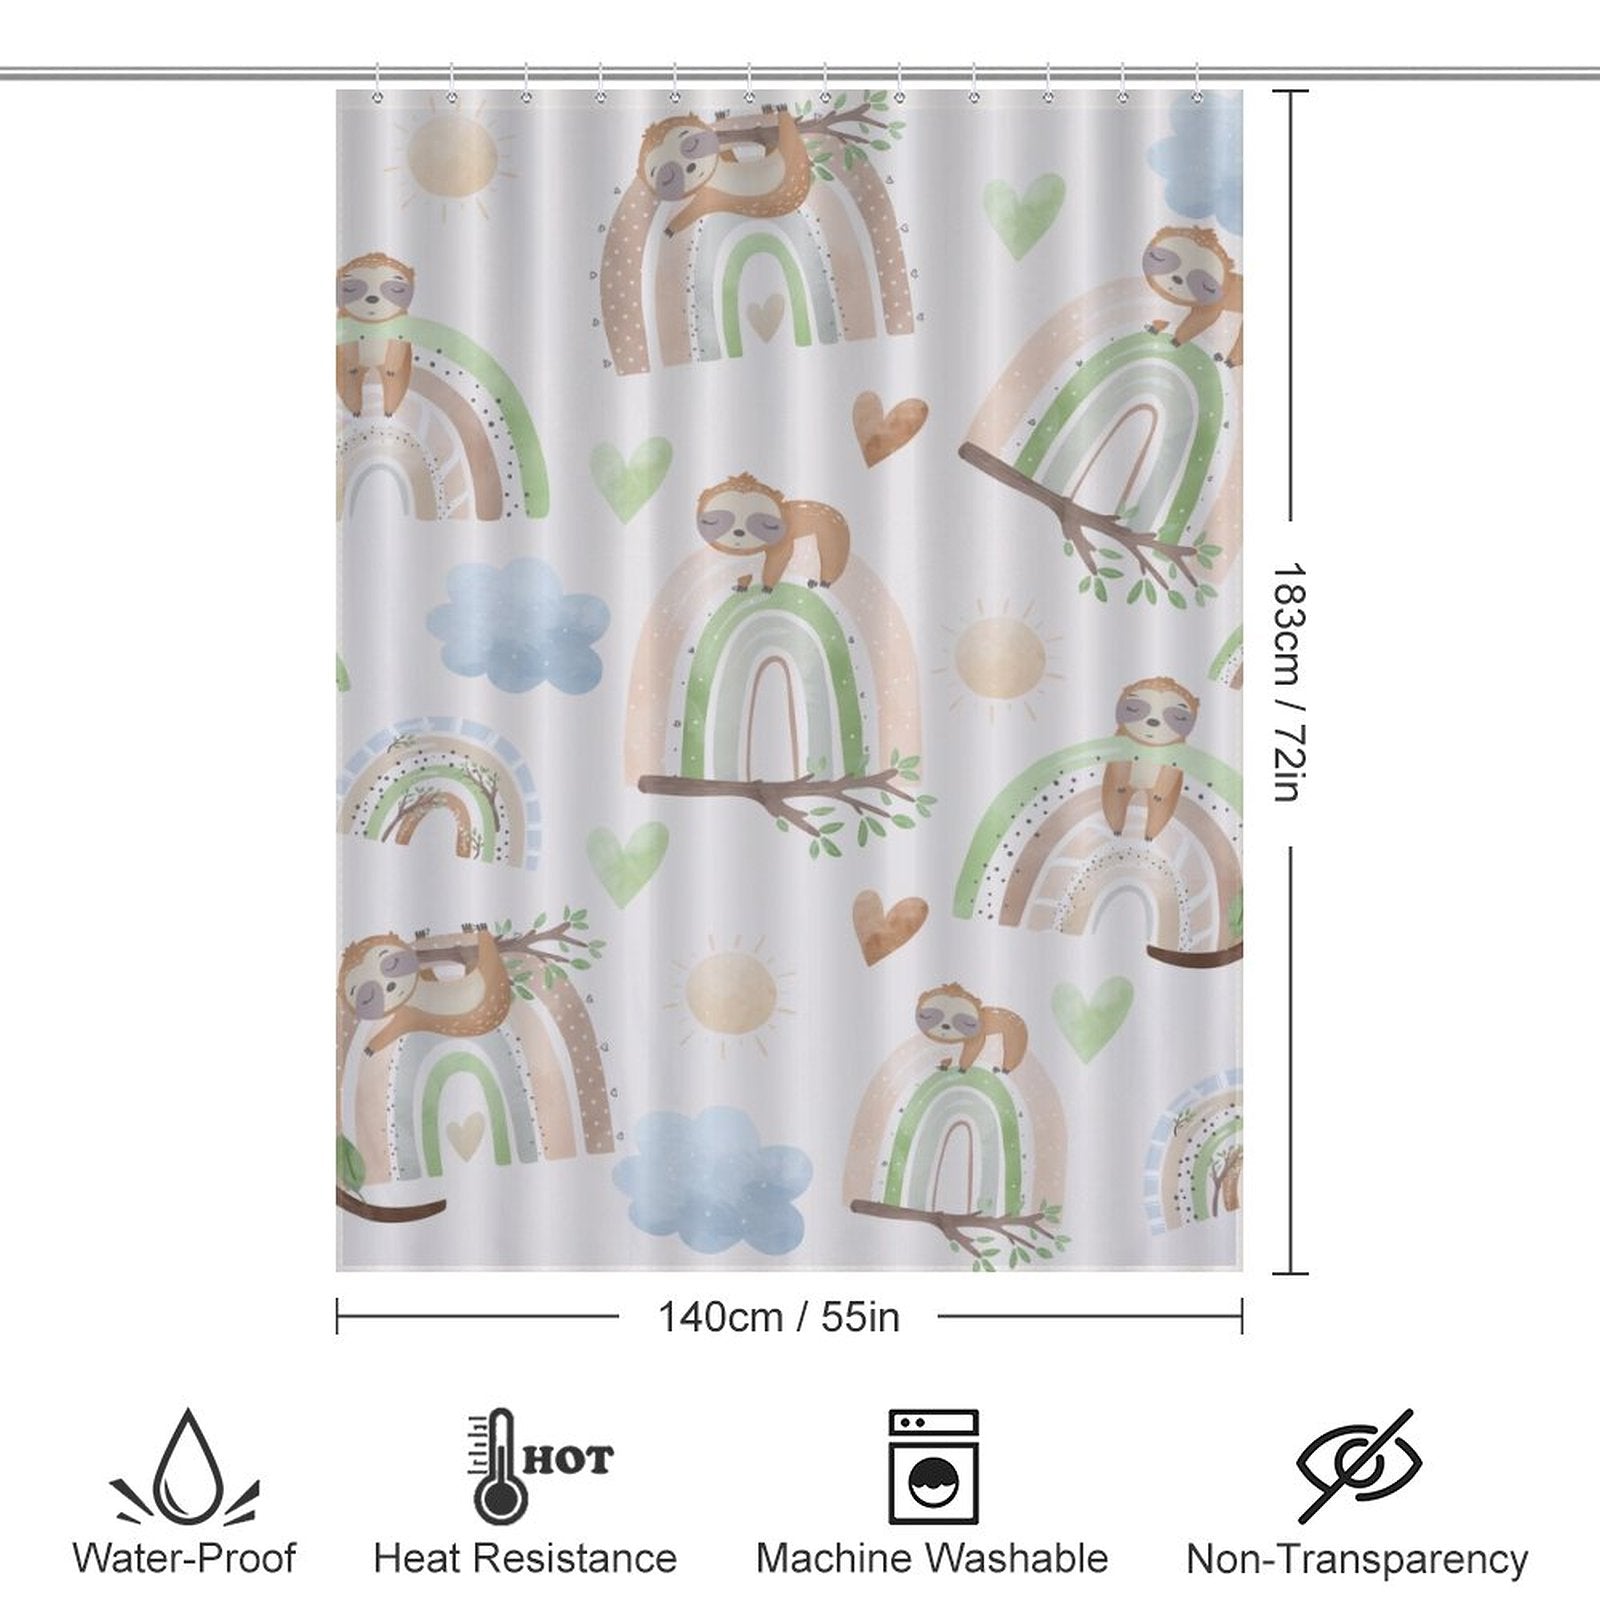 This Sloth Rainbow Shower Curtain-Cottoncat from Cotton Cat creates a calming oasis with its image of a sloth and rainbow.